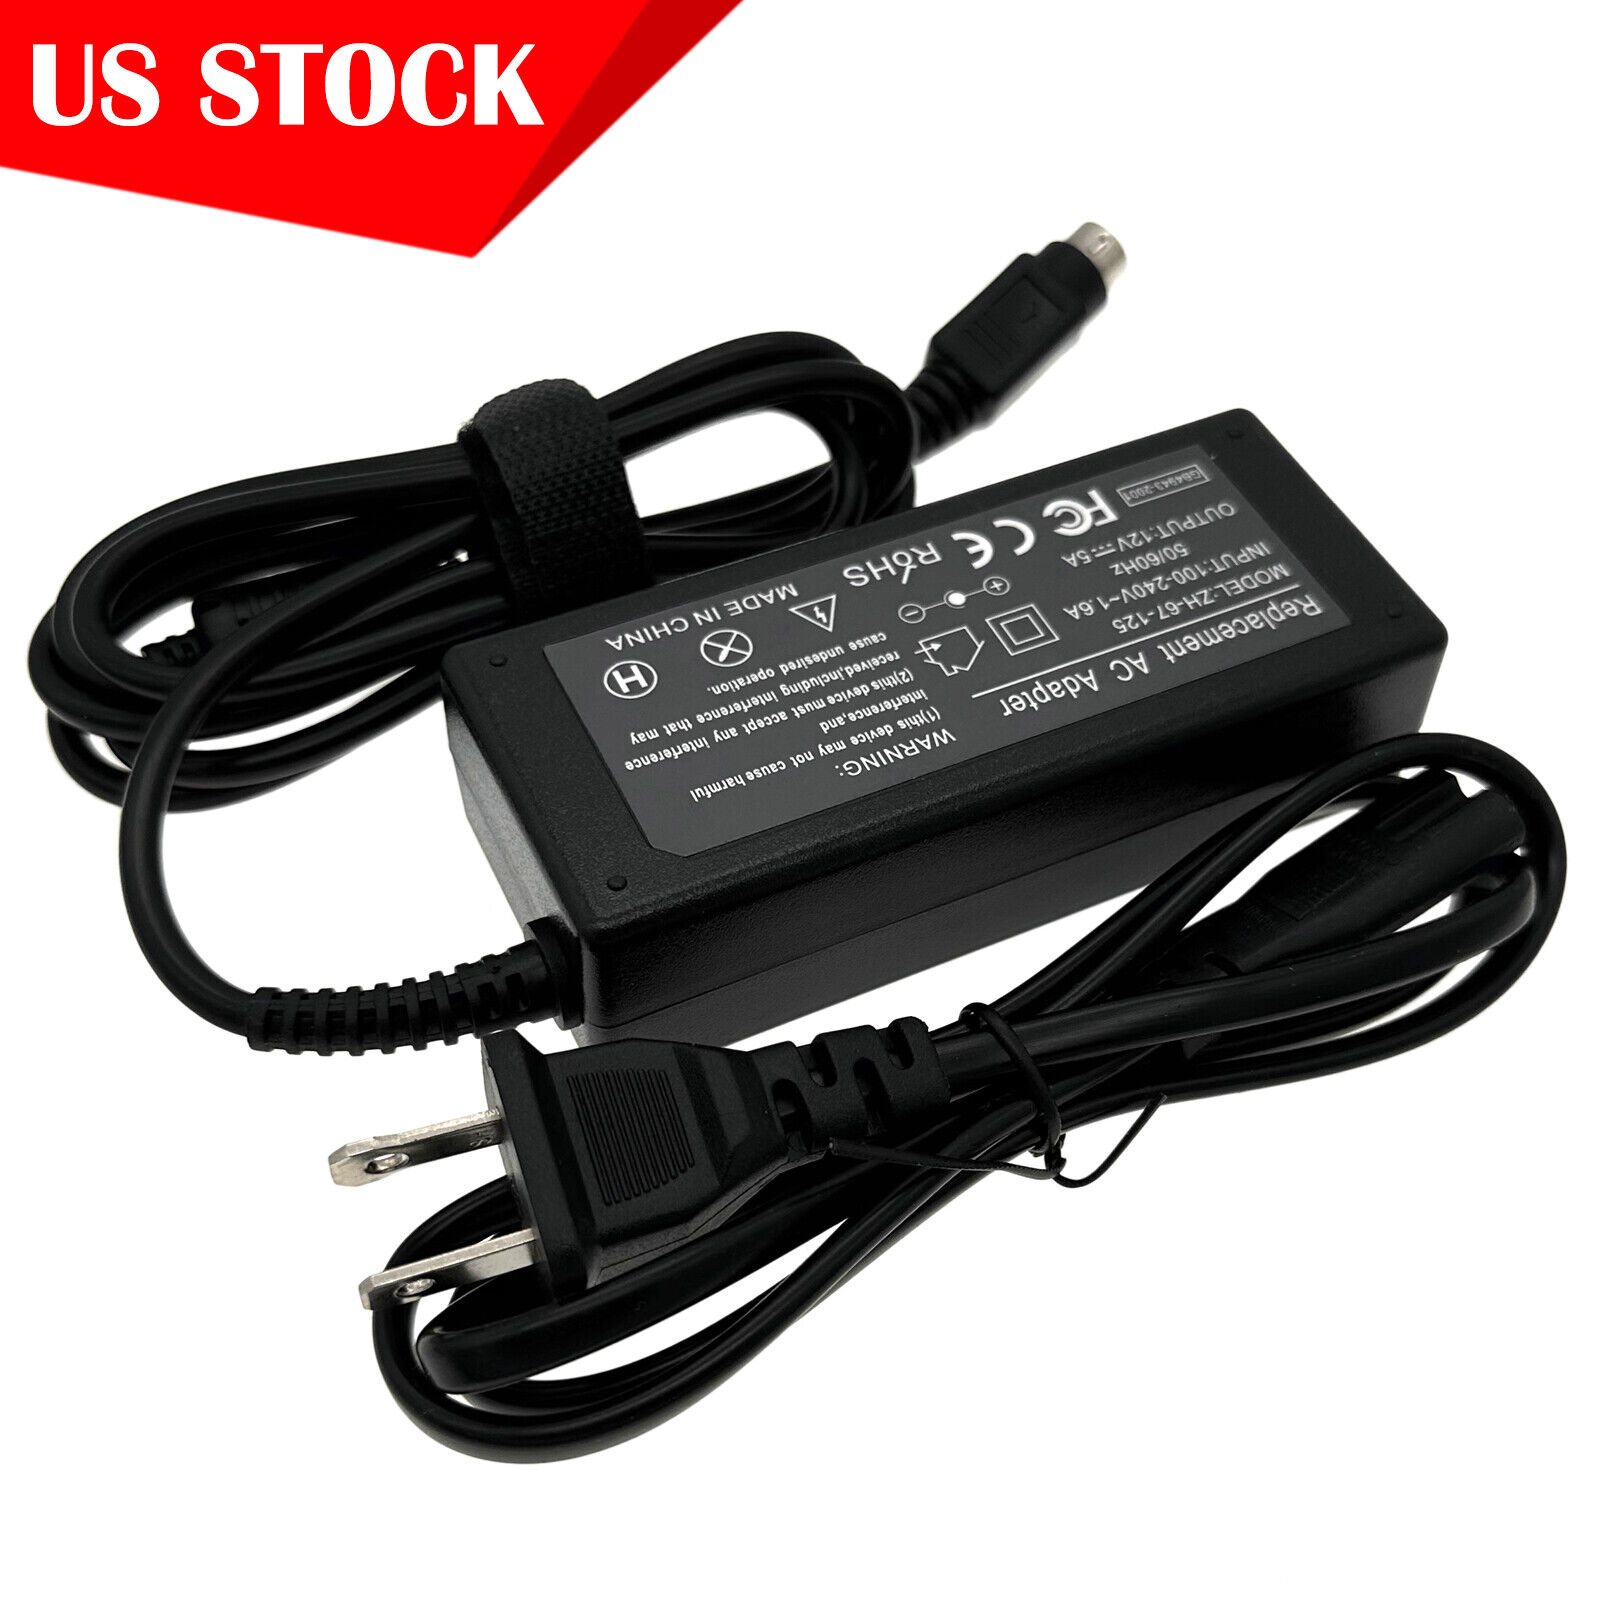 *Brand NEW* Sanyo CLT1554 CLT2054 LCD TV Monitor 12V 4-Pin DIN AC Power Adapter Charger